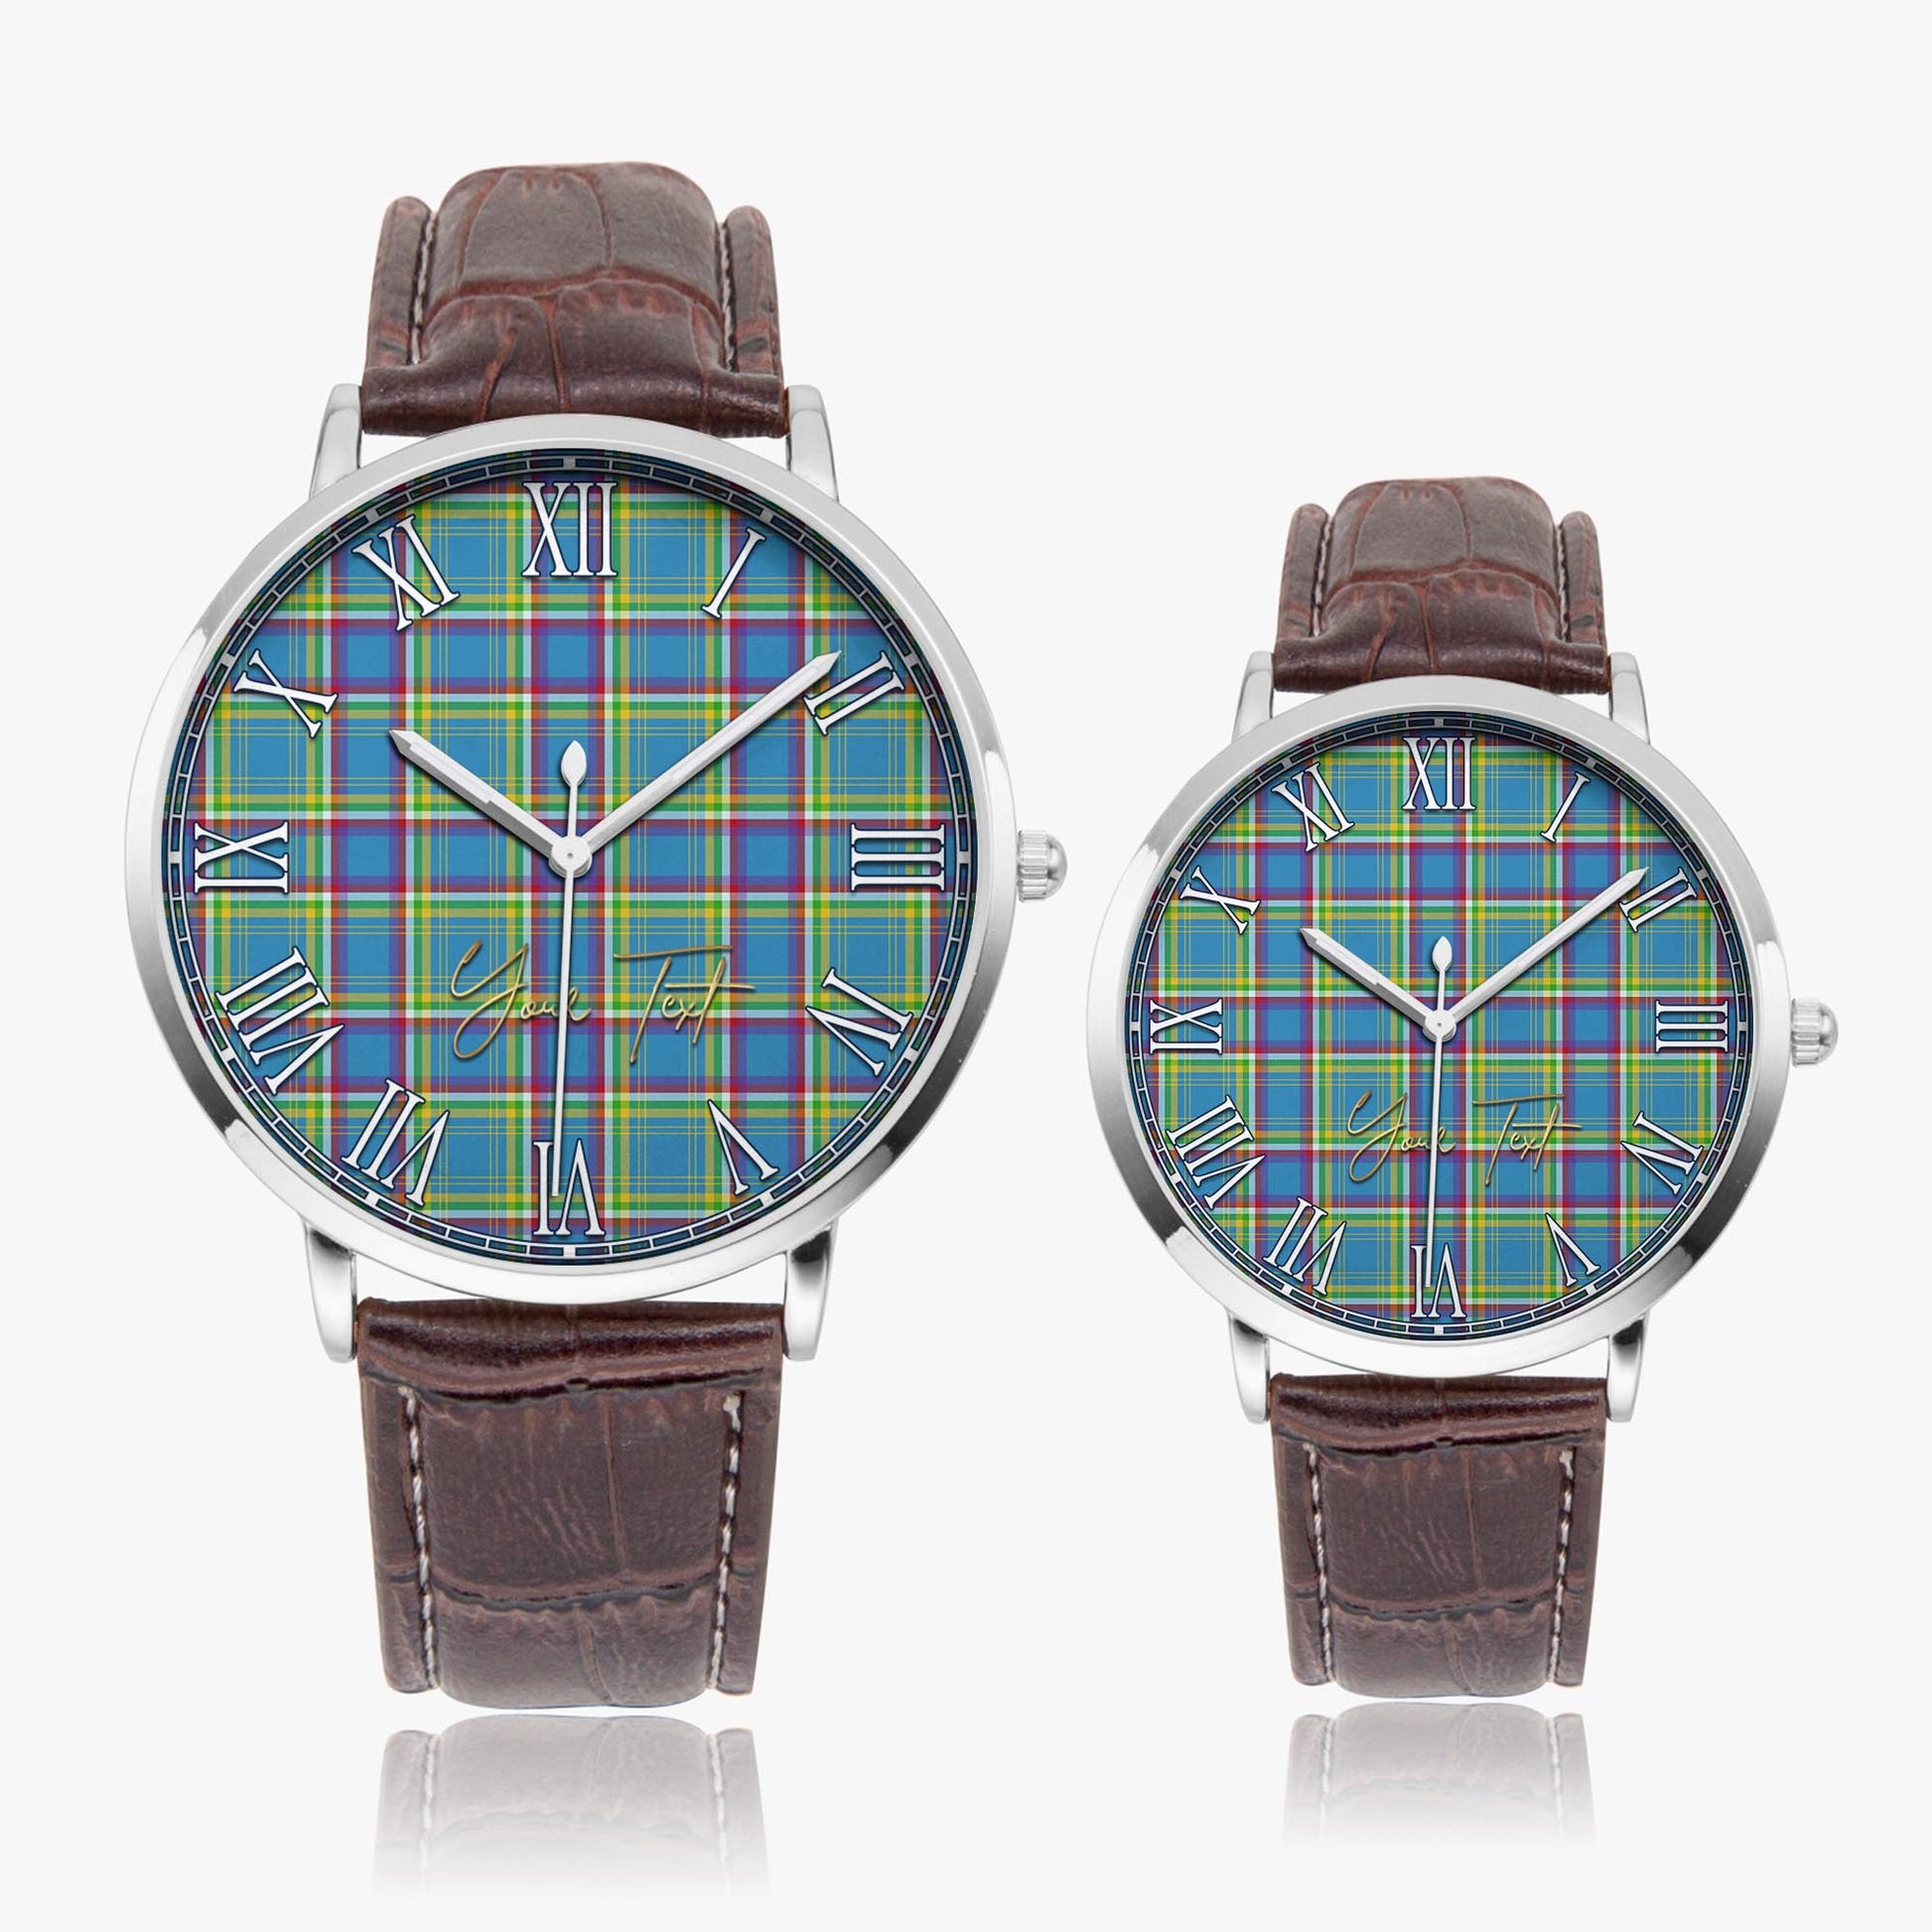 Yukon Territory Canada Tartan Personalized Your Text Leather Trap Quartz Watch Ultra Thin Silver Case With Brown Leather Strap - Tartanvibesclothing Shop